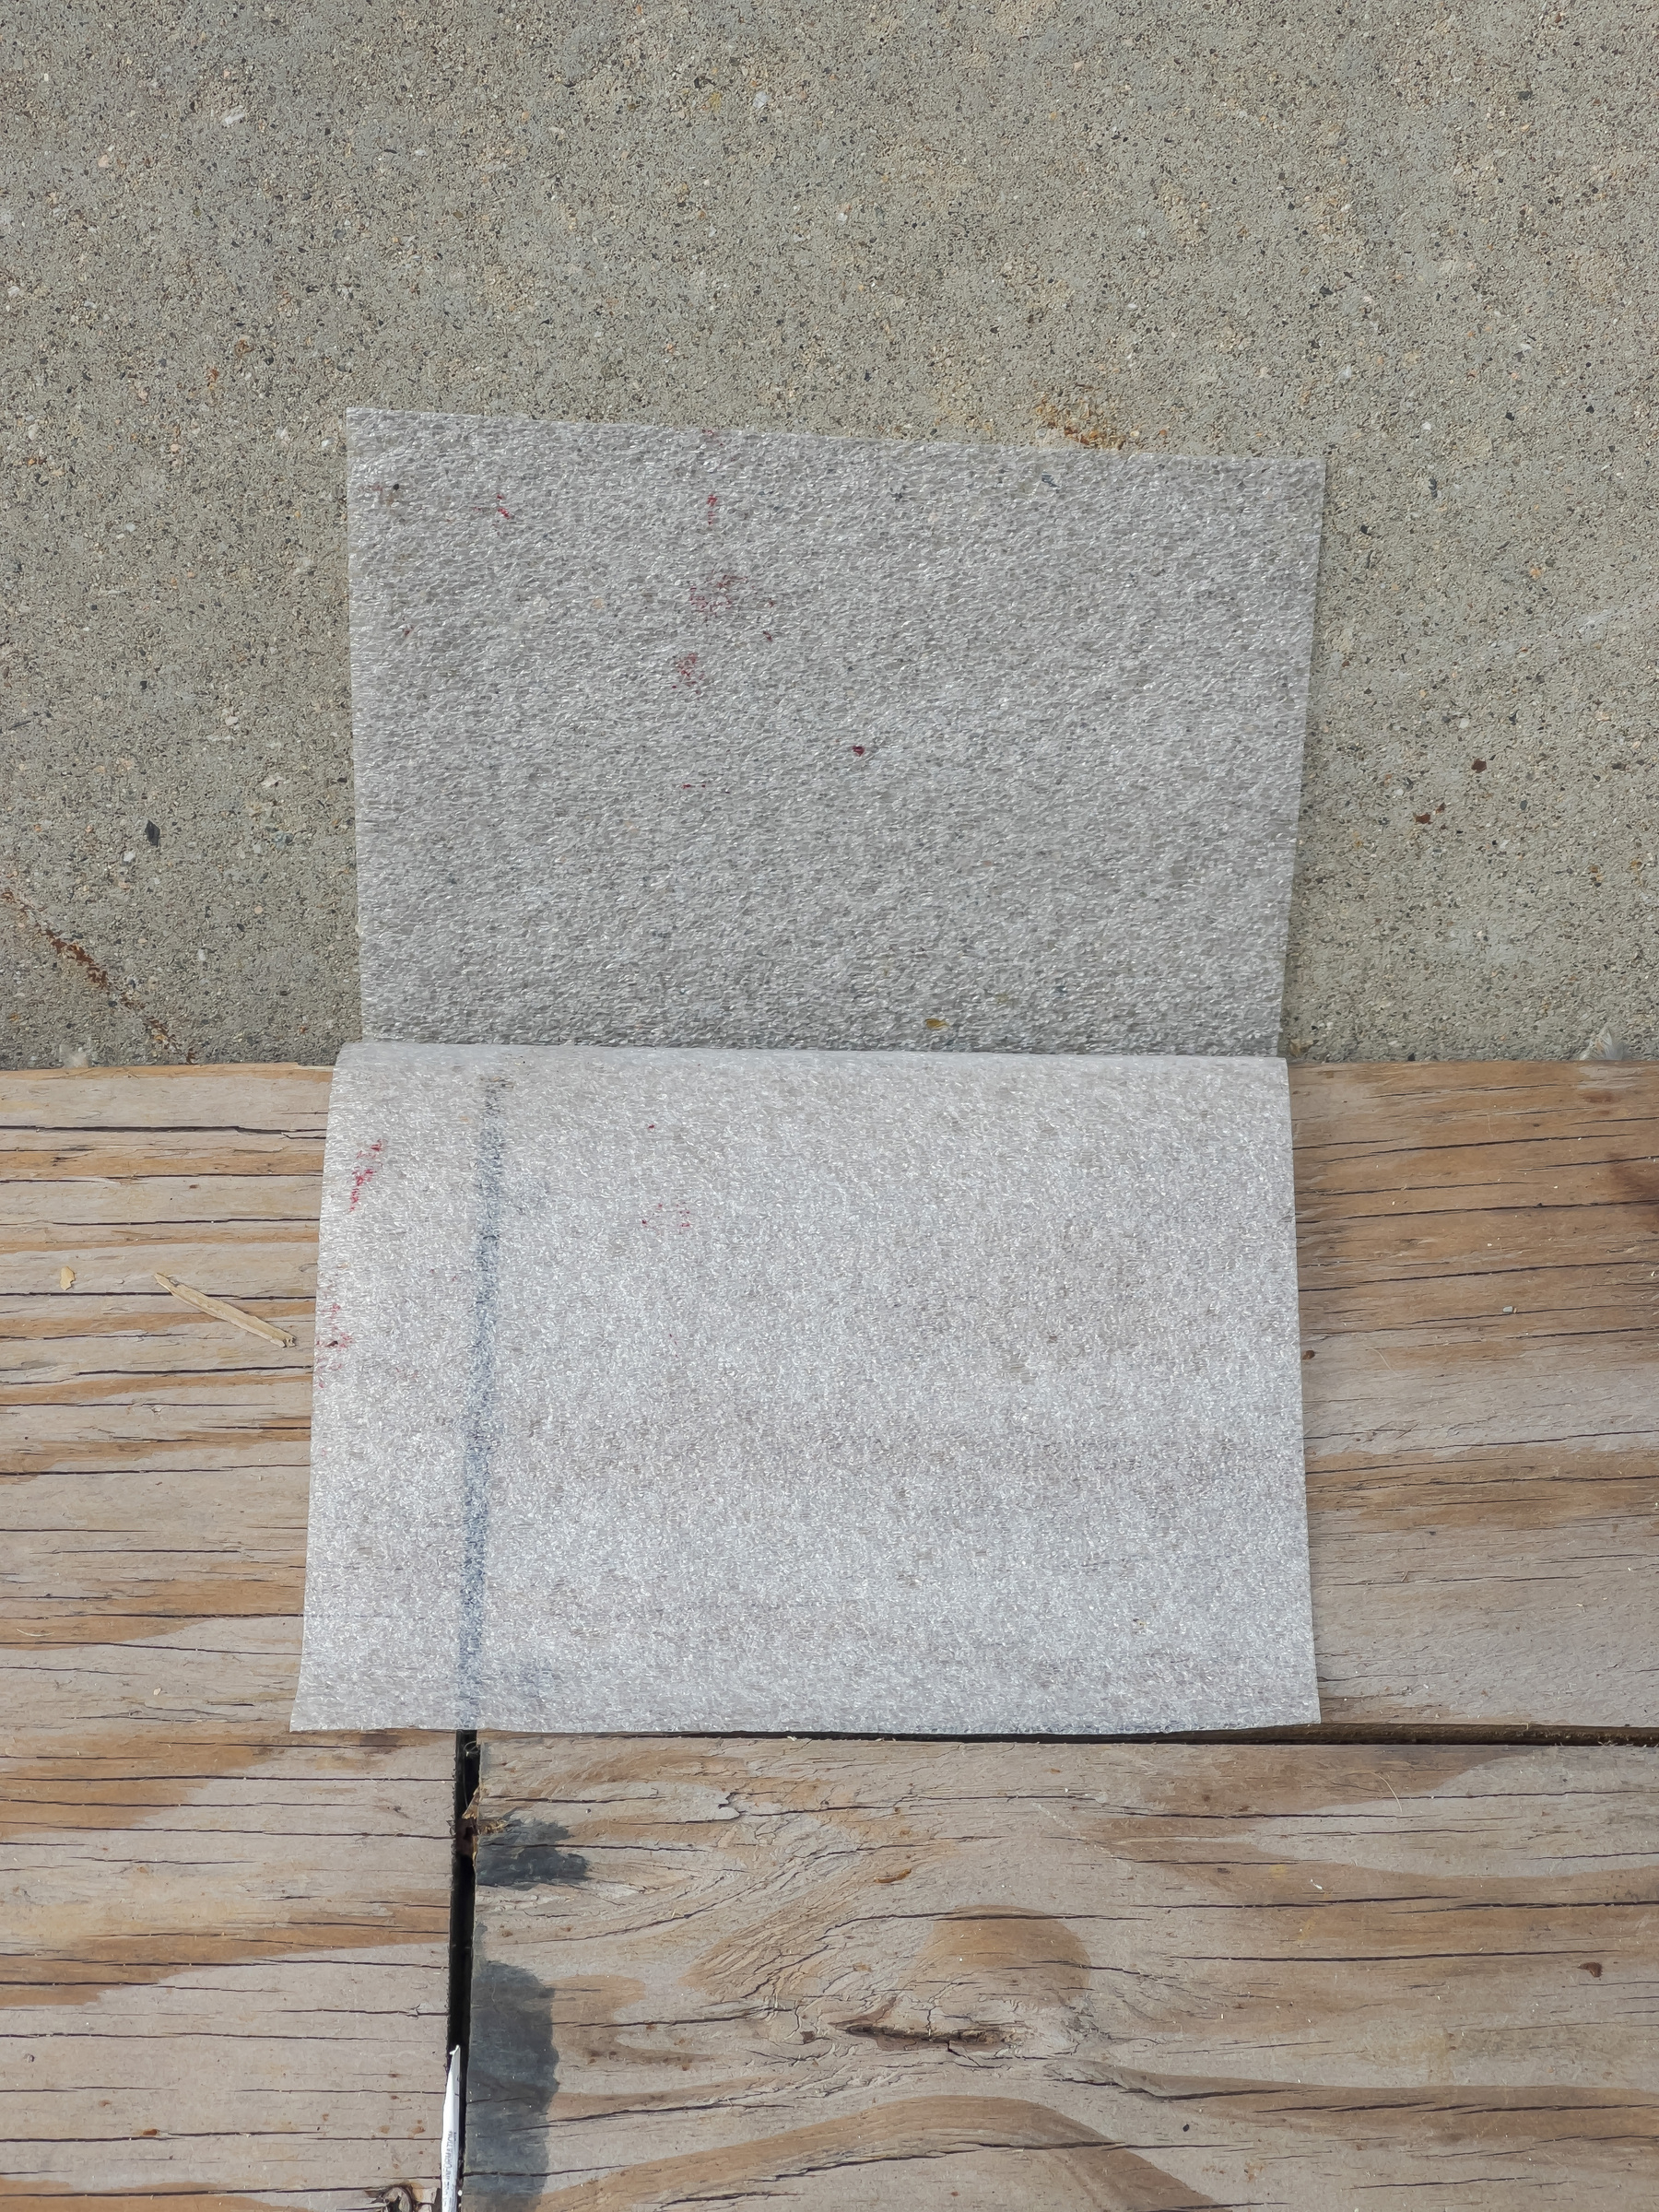 rectangular paper sheet laying on top of plywood and against concrete barrier